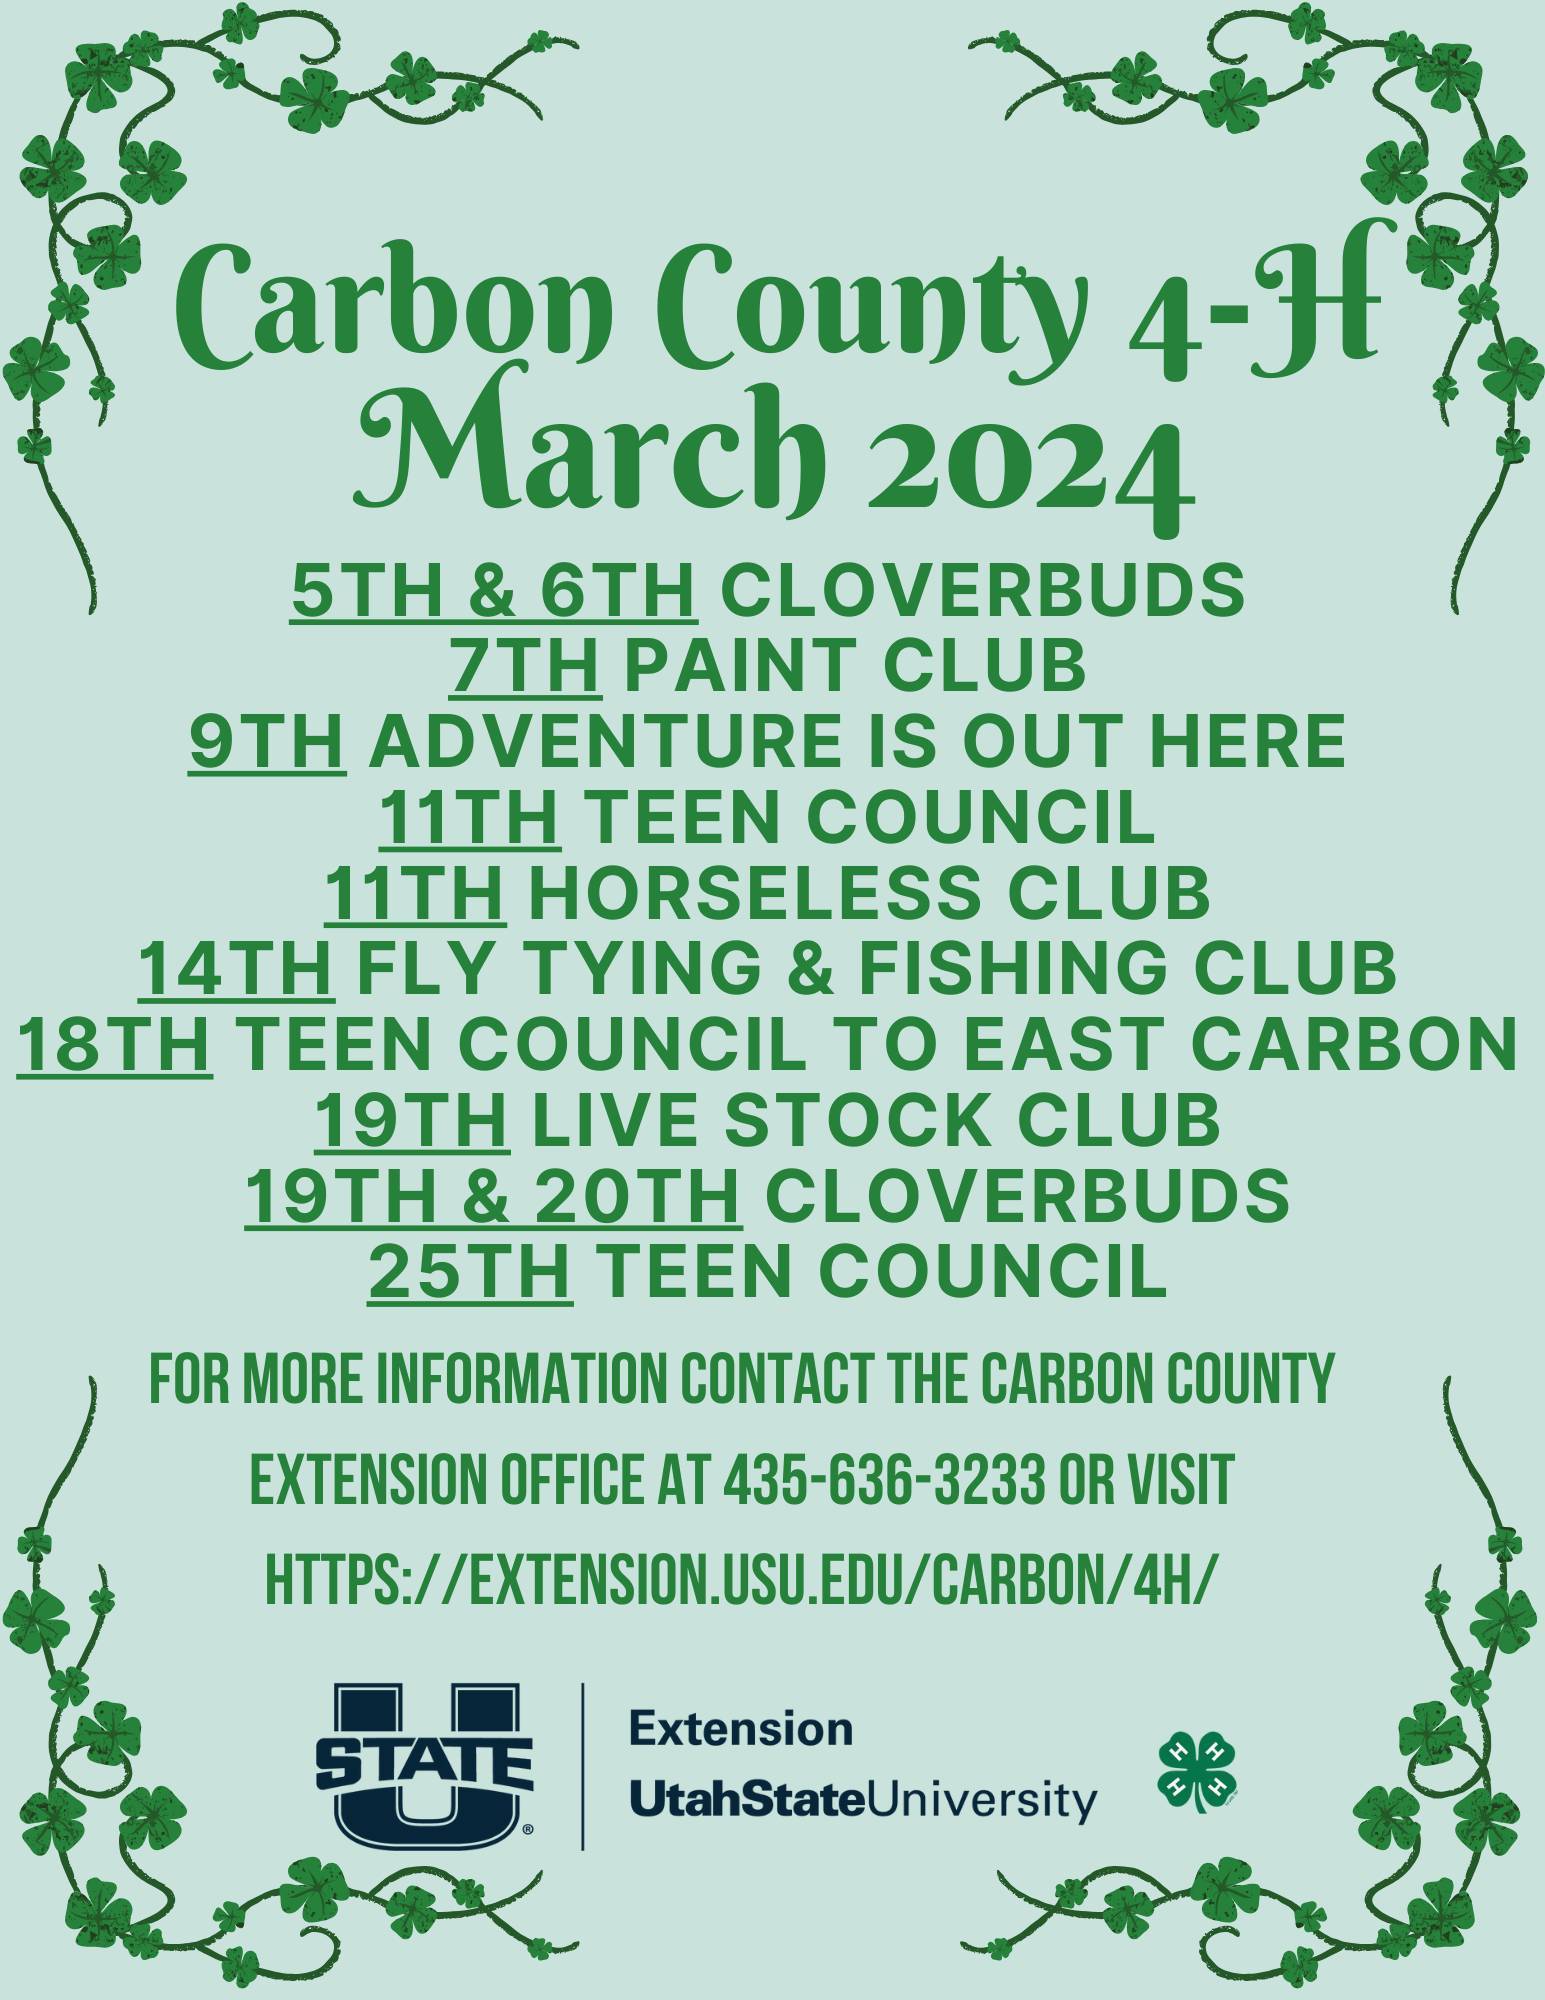 Carbon-County-4-H-March-2024-Monthly-Calendar-Flyer-for-Online.jpg